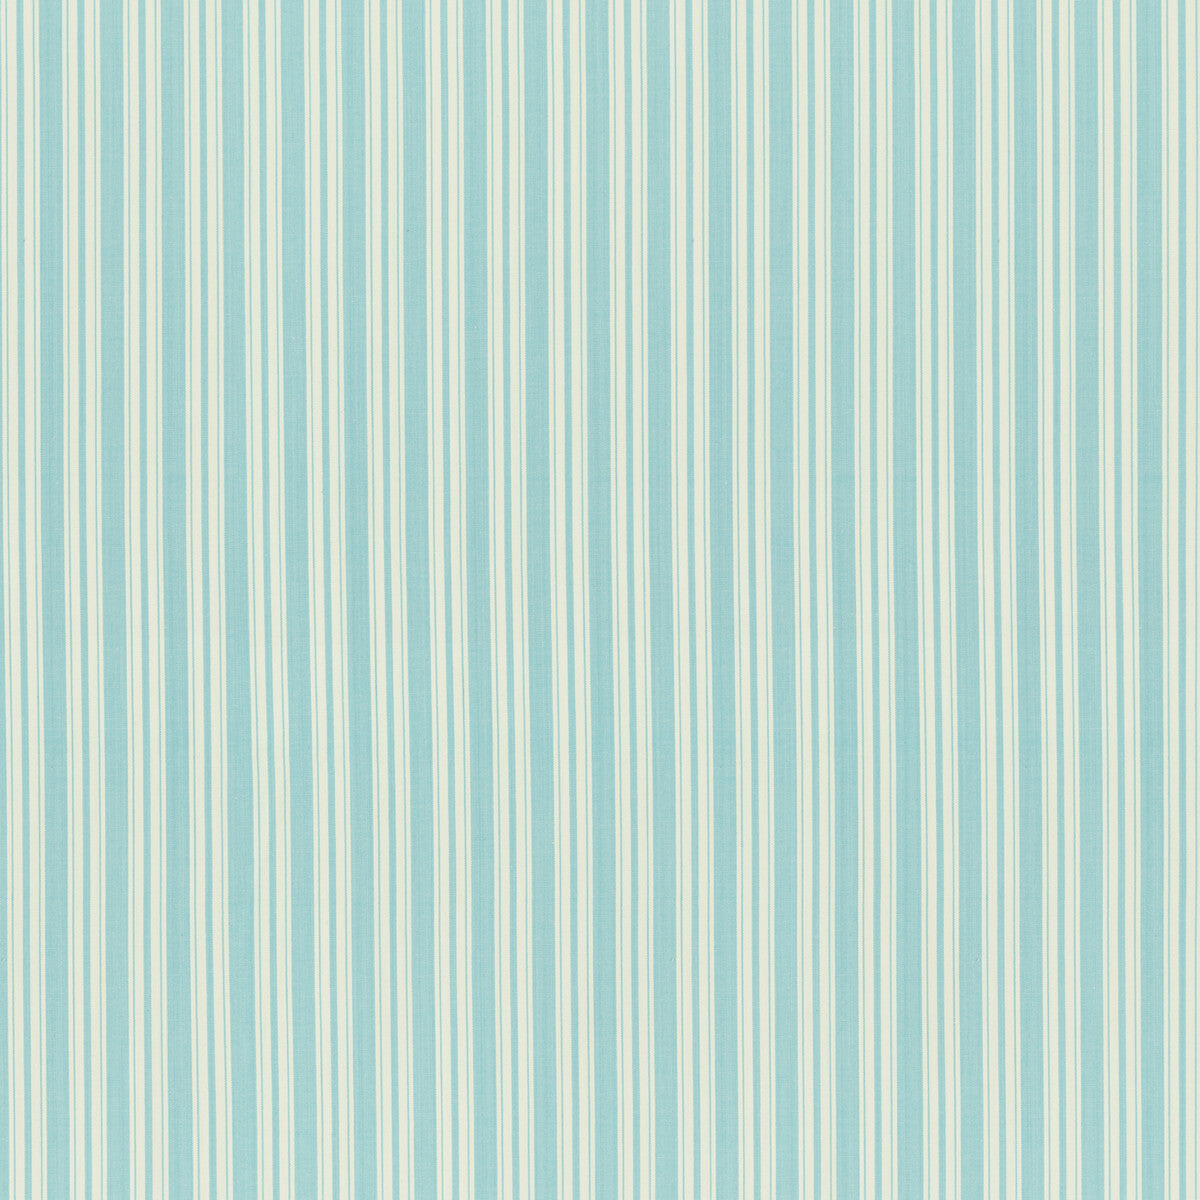 Selune Stripe fabric in aqua color - pattern 8022118.13.0 - by Brunschwig &amp; Fils in the Normant Checks And Stripes II collection